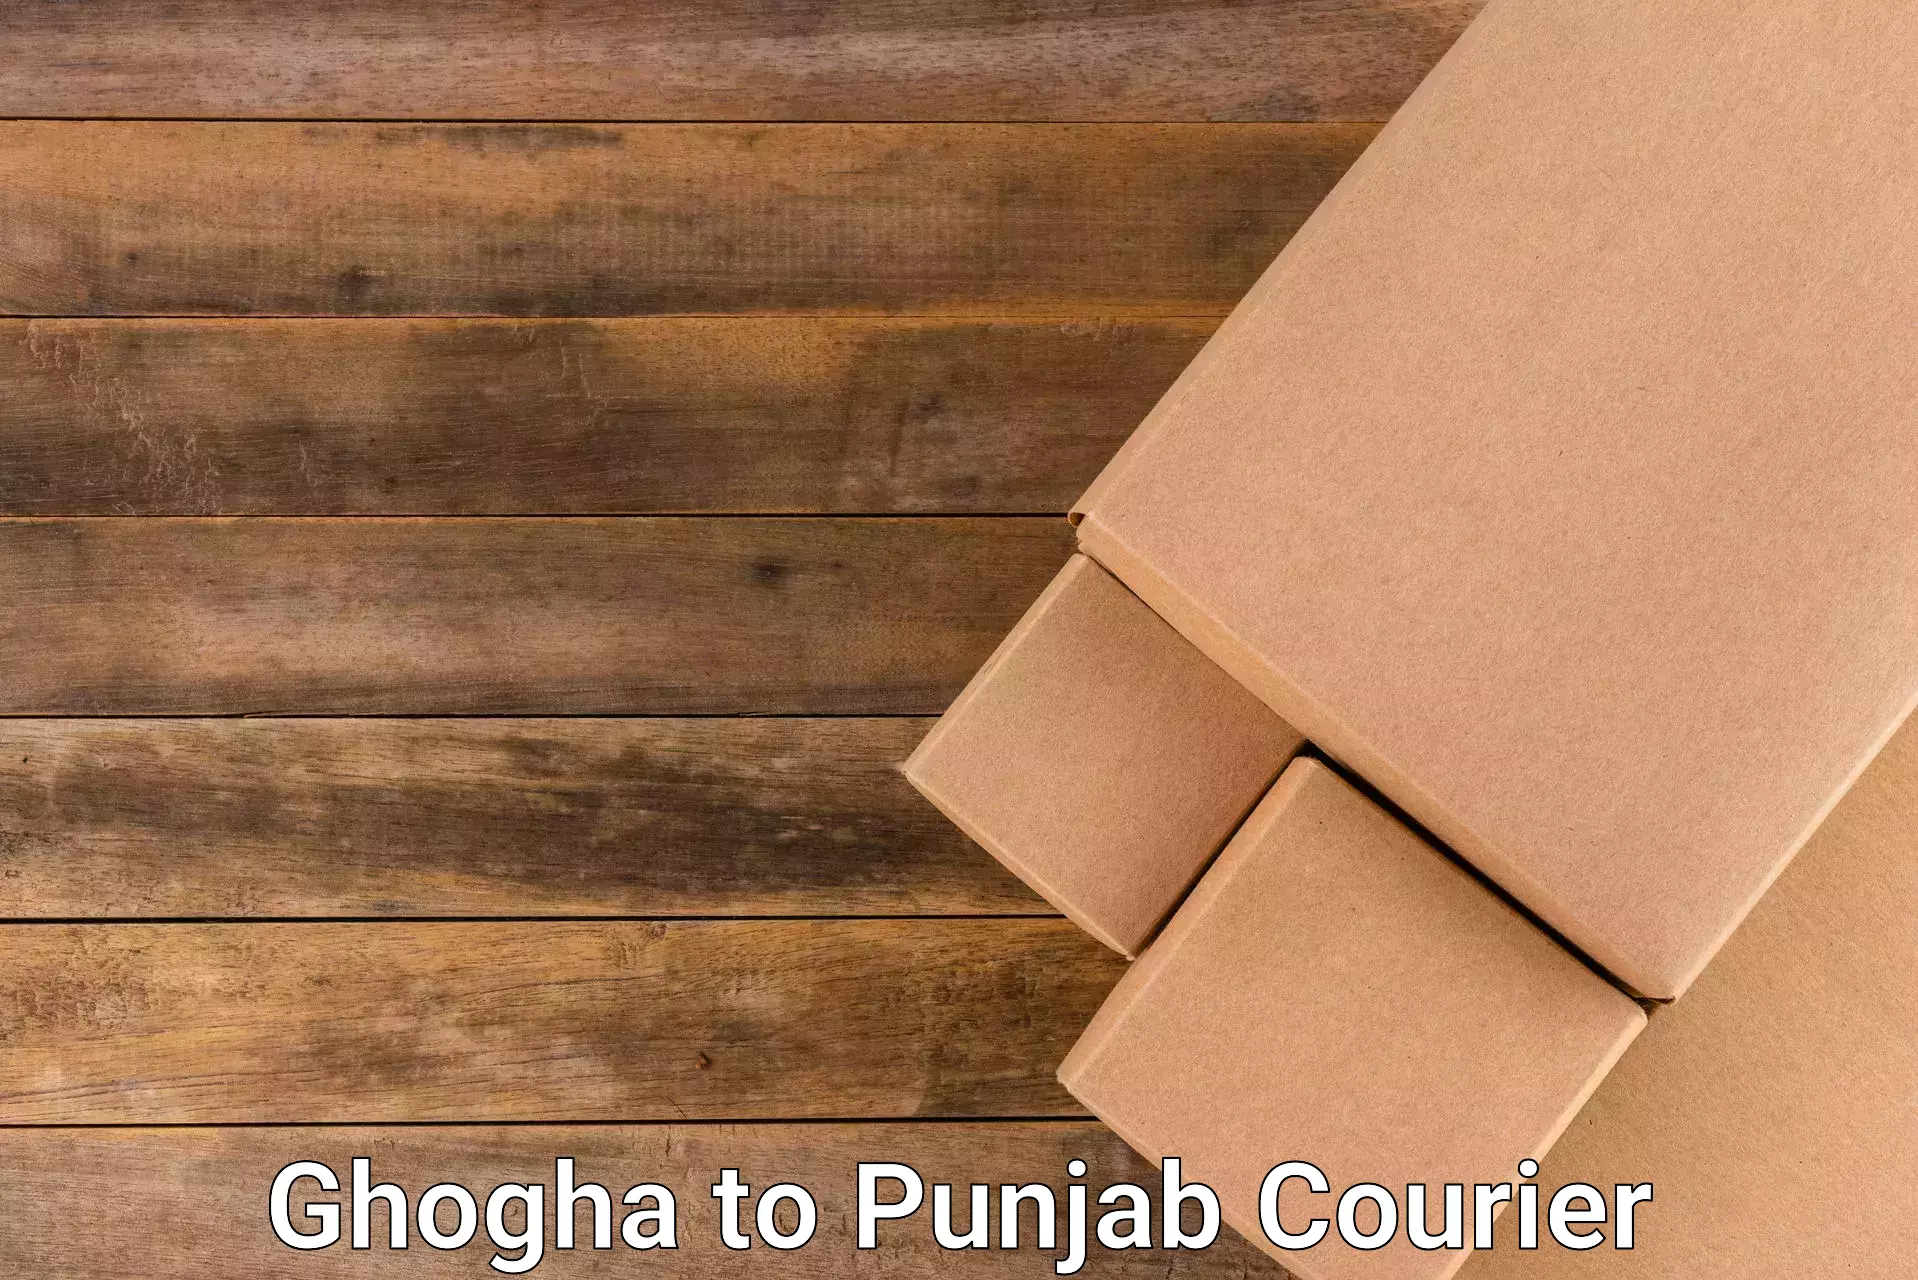 Professional parcel services Ghogha to Punjab